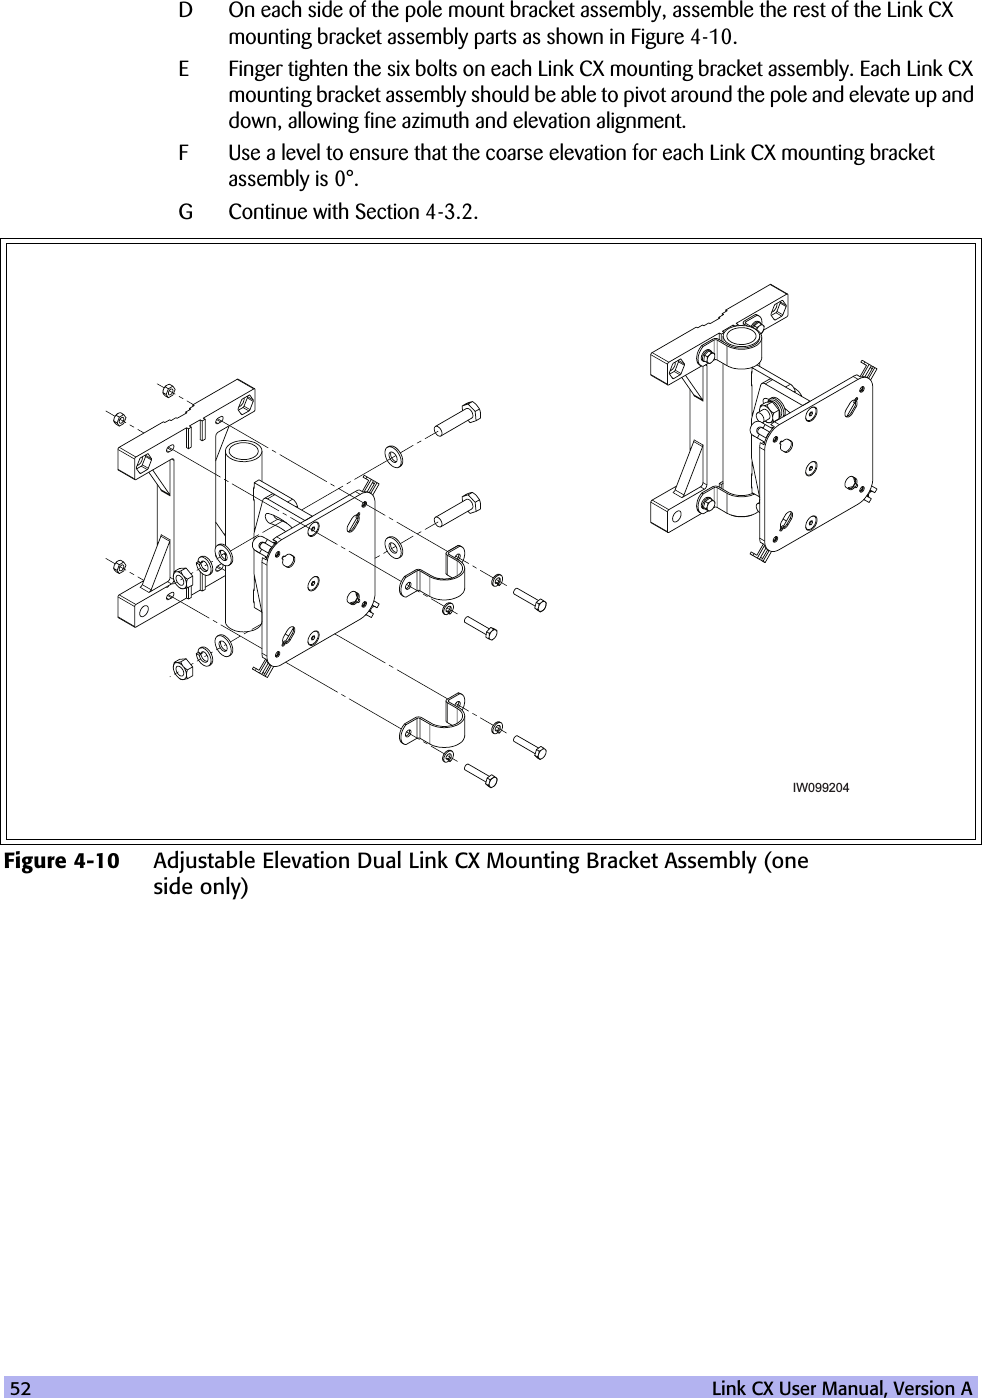 52   Link CX User Manual, Version AD On each side of the pole mount bracket assembly, assemble the rest of the Link CX mounting bracket assembly parts as shown in Figure 4-10. E Finger tighten the six bolts on each Link CX mounting bracket assembly. Each Link CX mounting bracket assembly should be able to pivot around the pole and elevate up and down, allowing fine azimuth and elevation alignment. F Use a level to ensure that the coarse elevation for each Link CX mounting bracket assembly is 0°. G Continue with Section 4-3.2.Figure 4-10 Adjustable Elevation Dual Link CX Mounting Bracket Assembly (one side only)IW099204